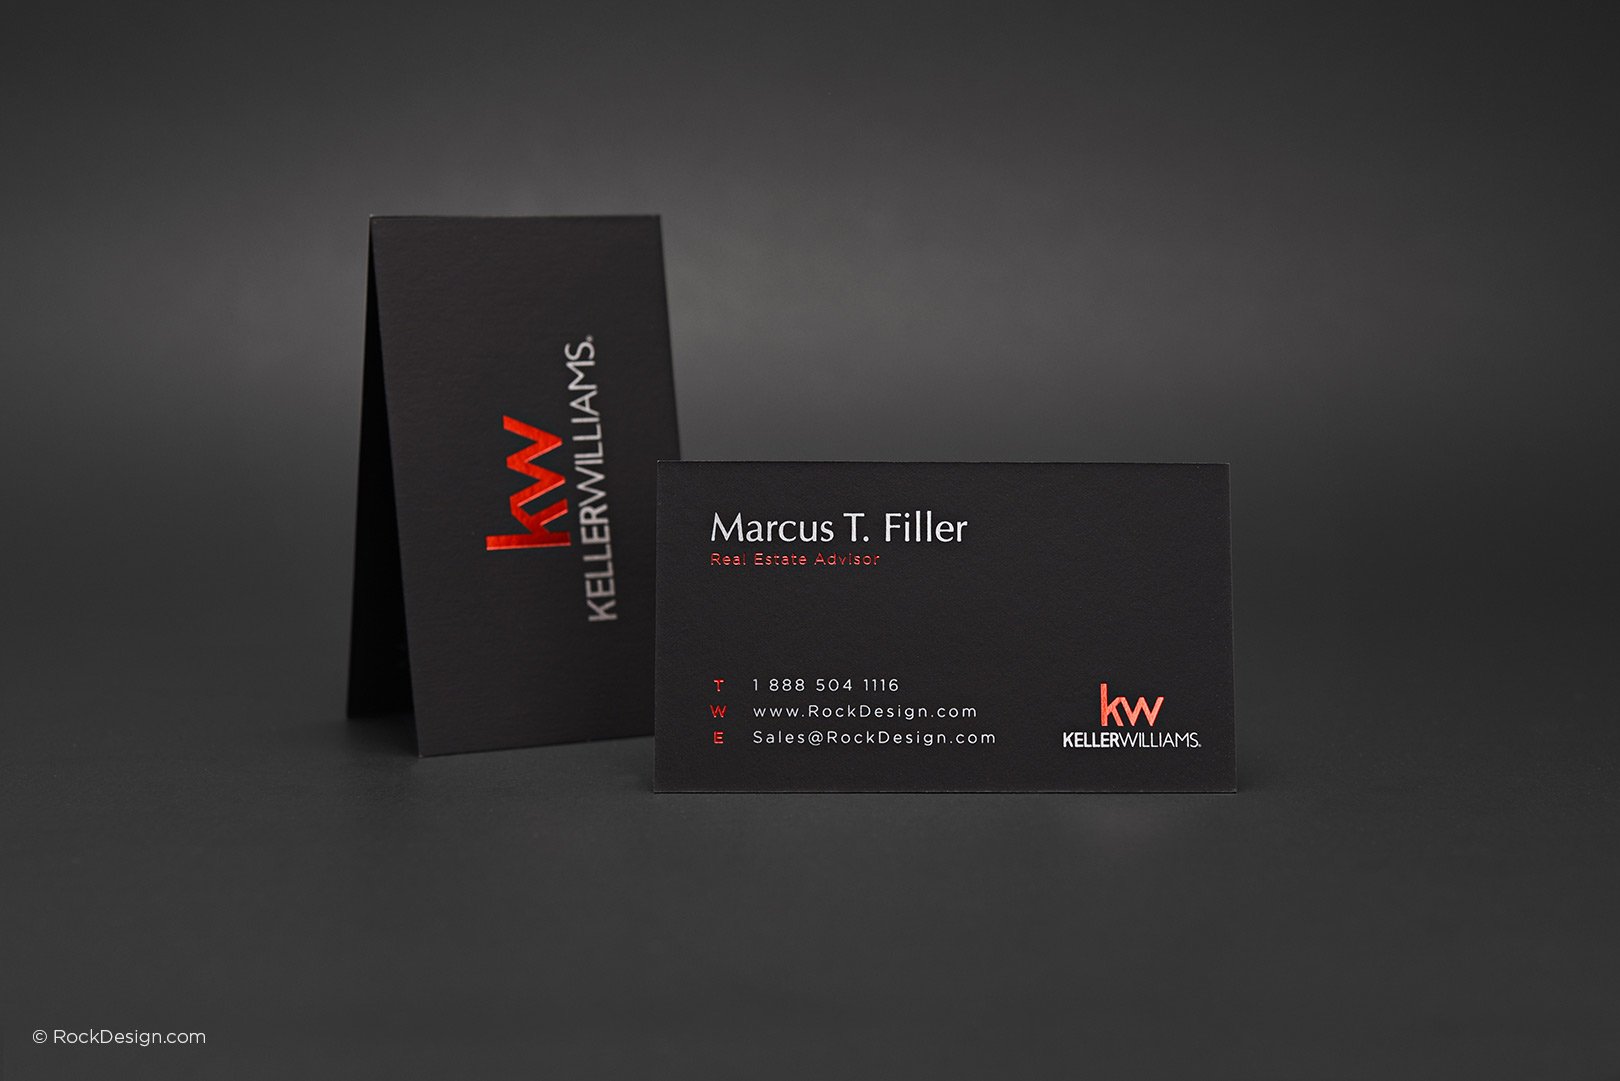 free-keller-williams-business-card-template-with-print-service